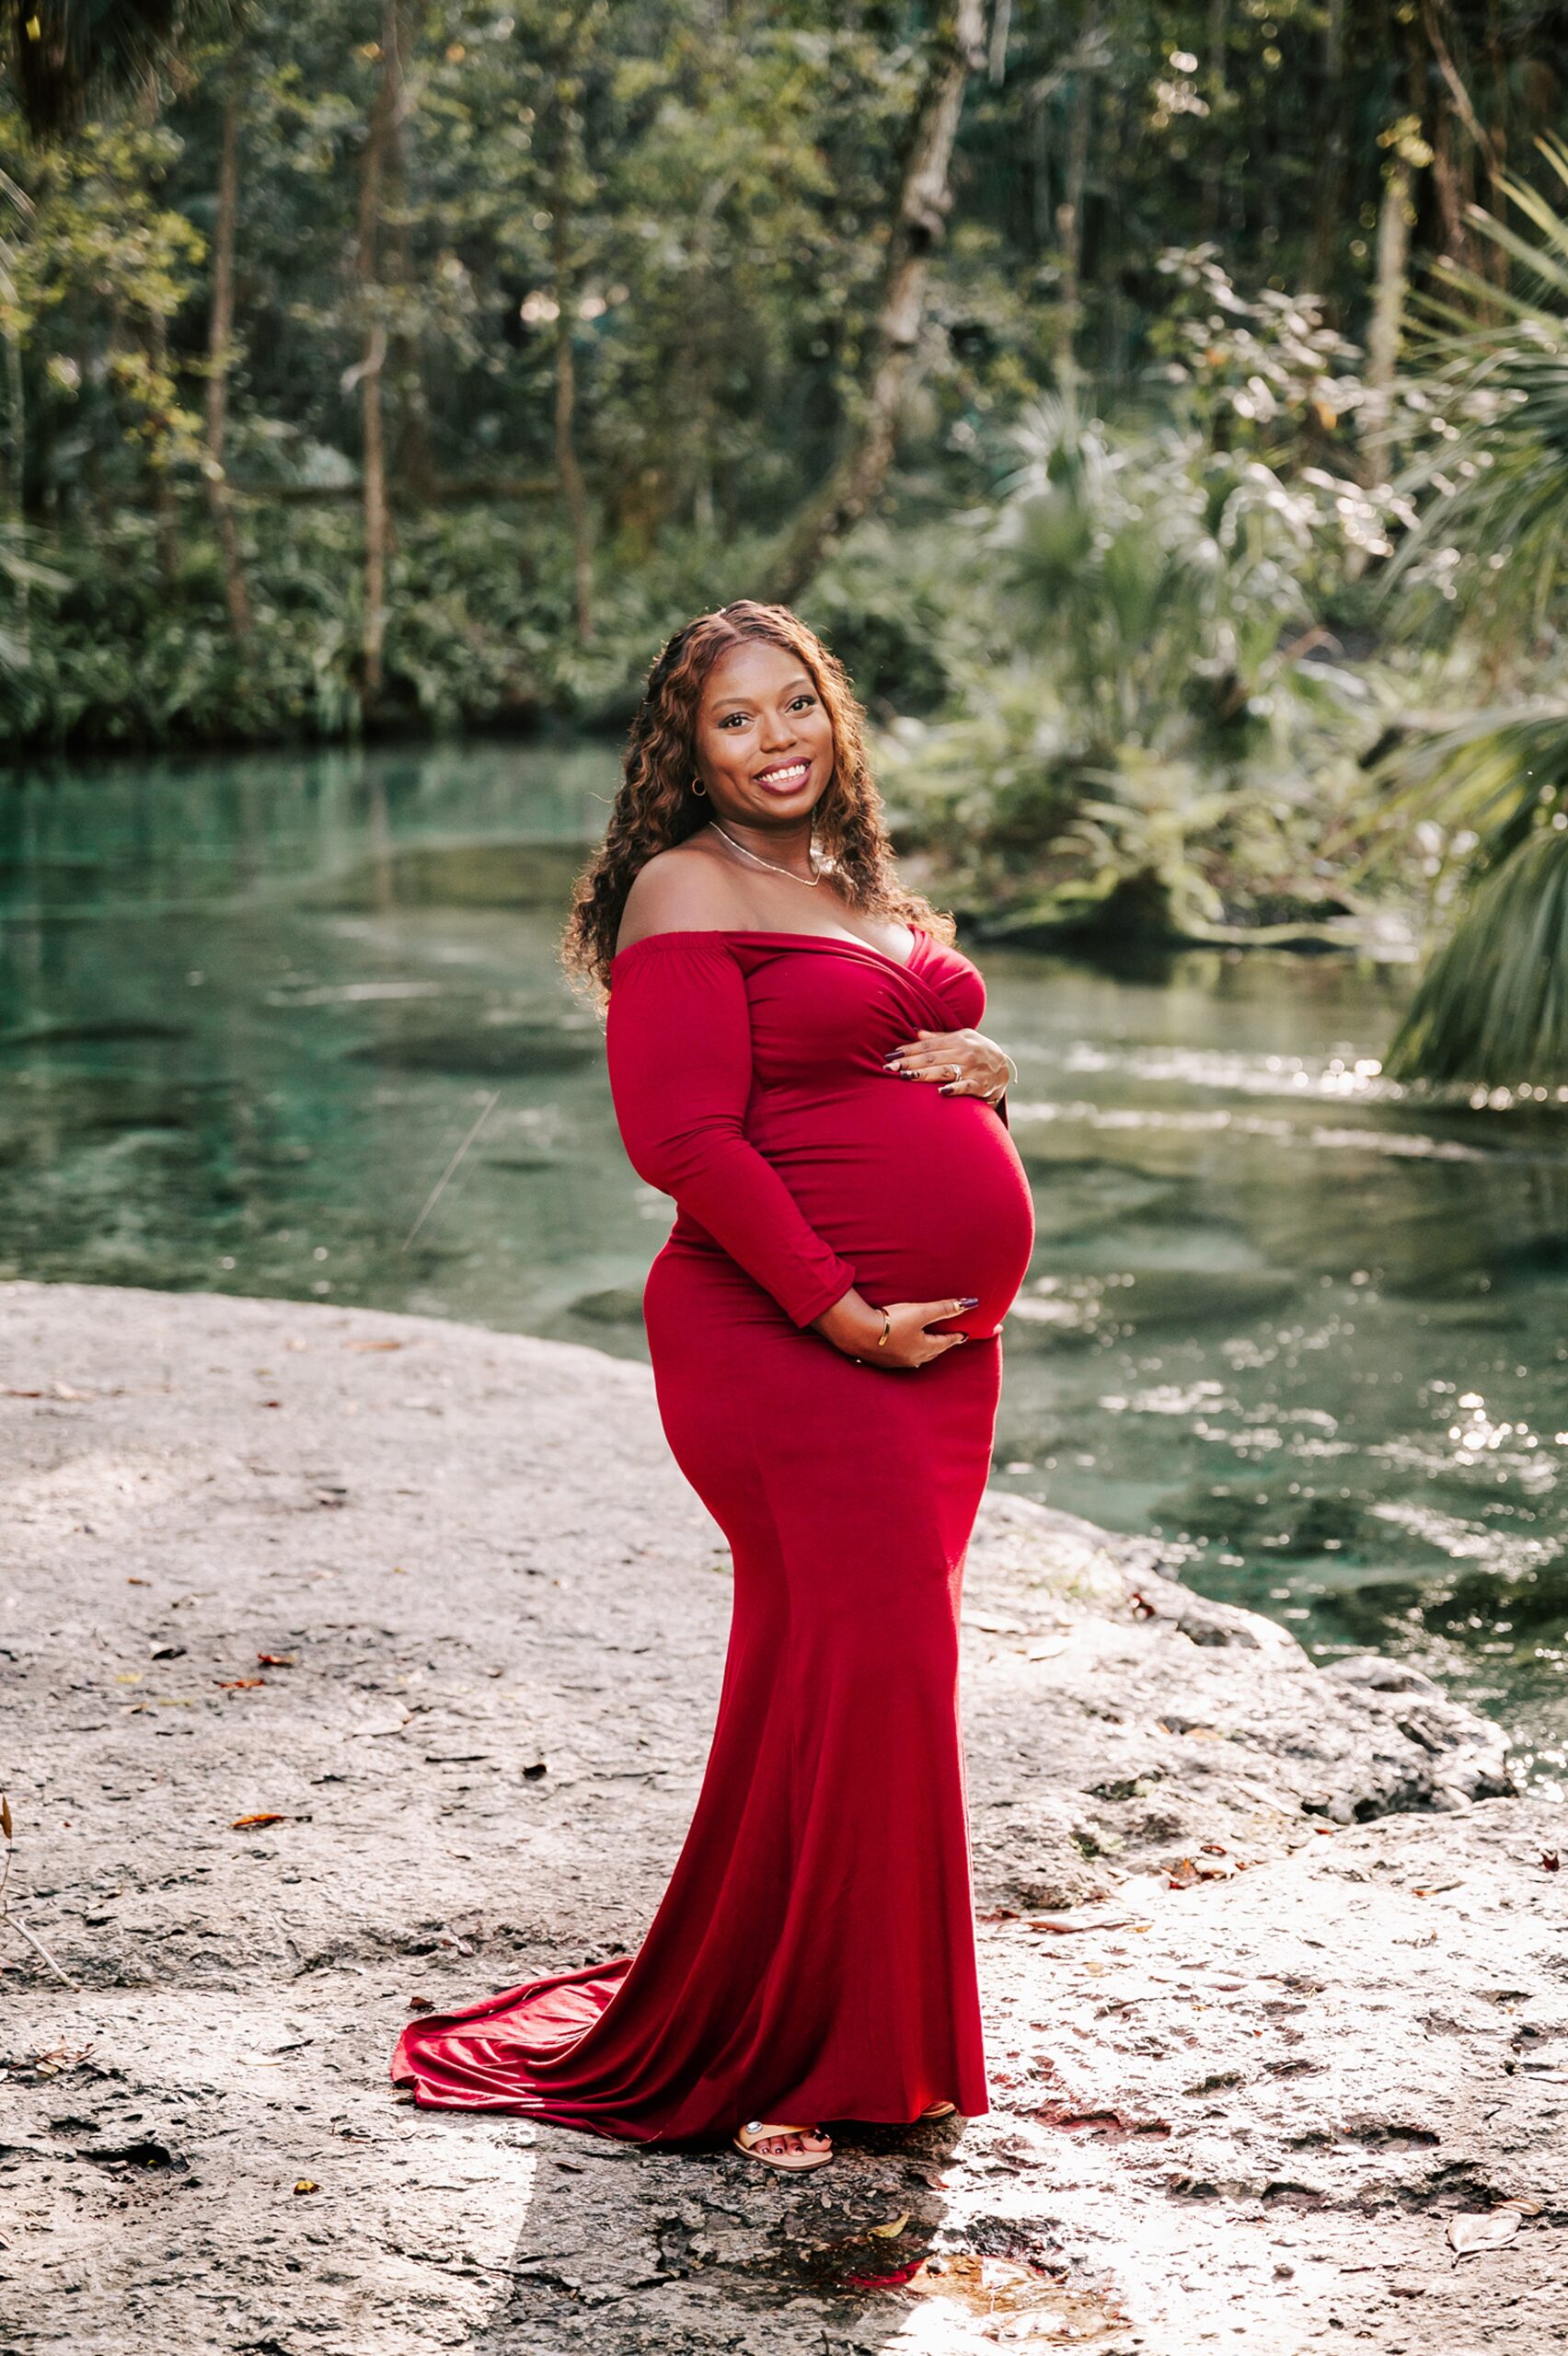 A mother to be stands on the edge of a river holding her bump in a red maternity gown after visiting Elements of Bodywork